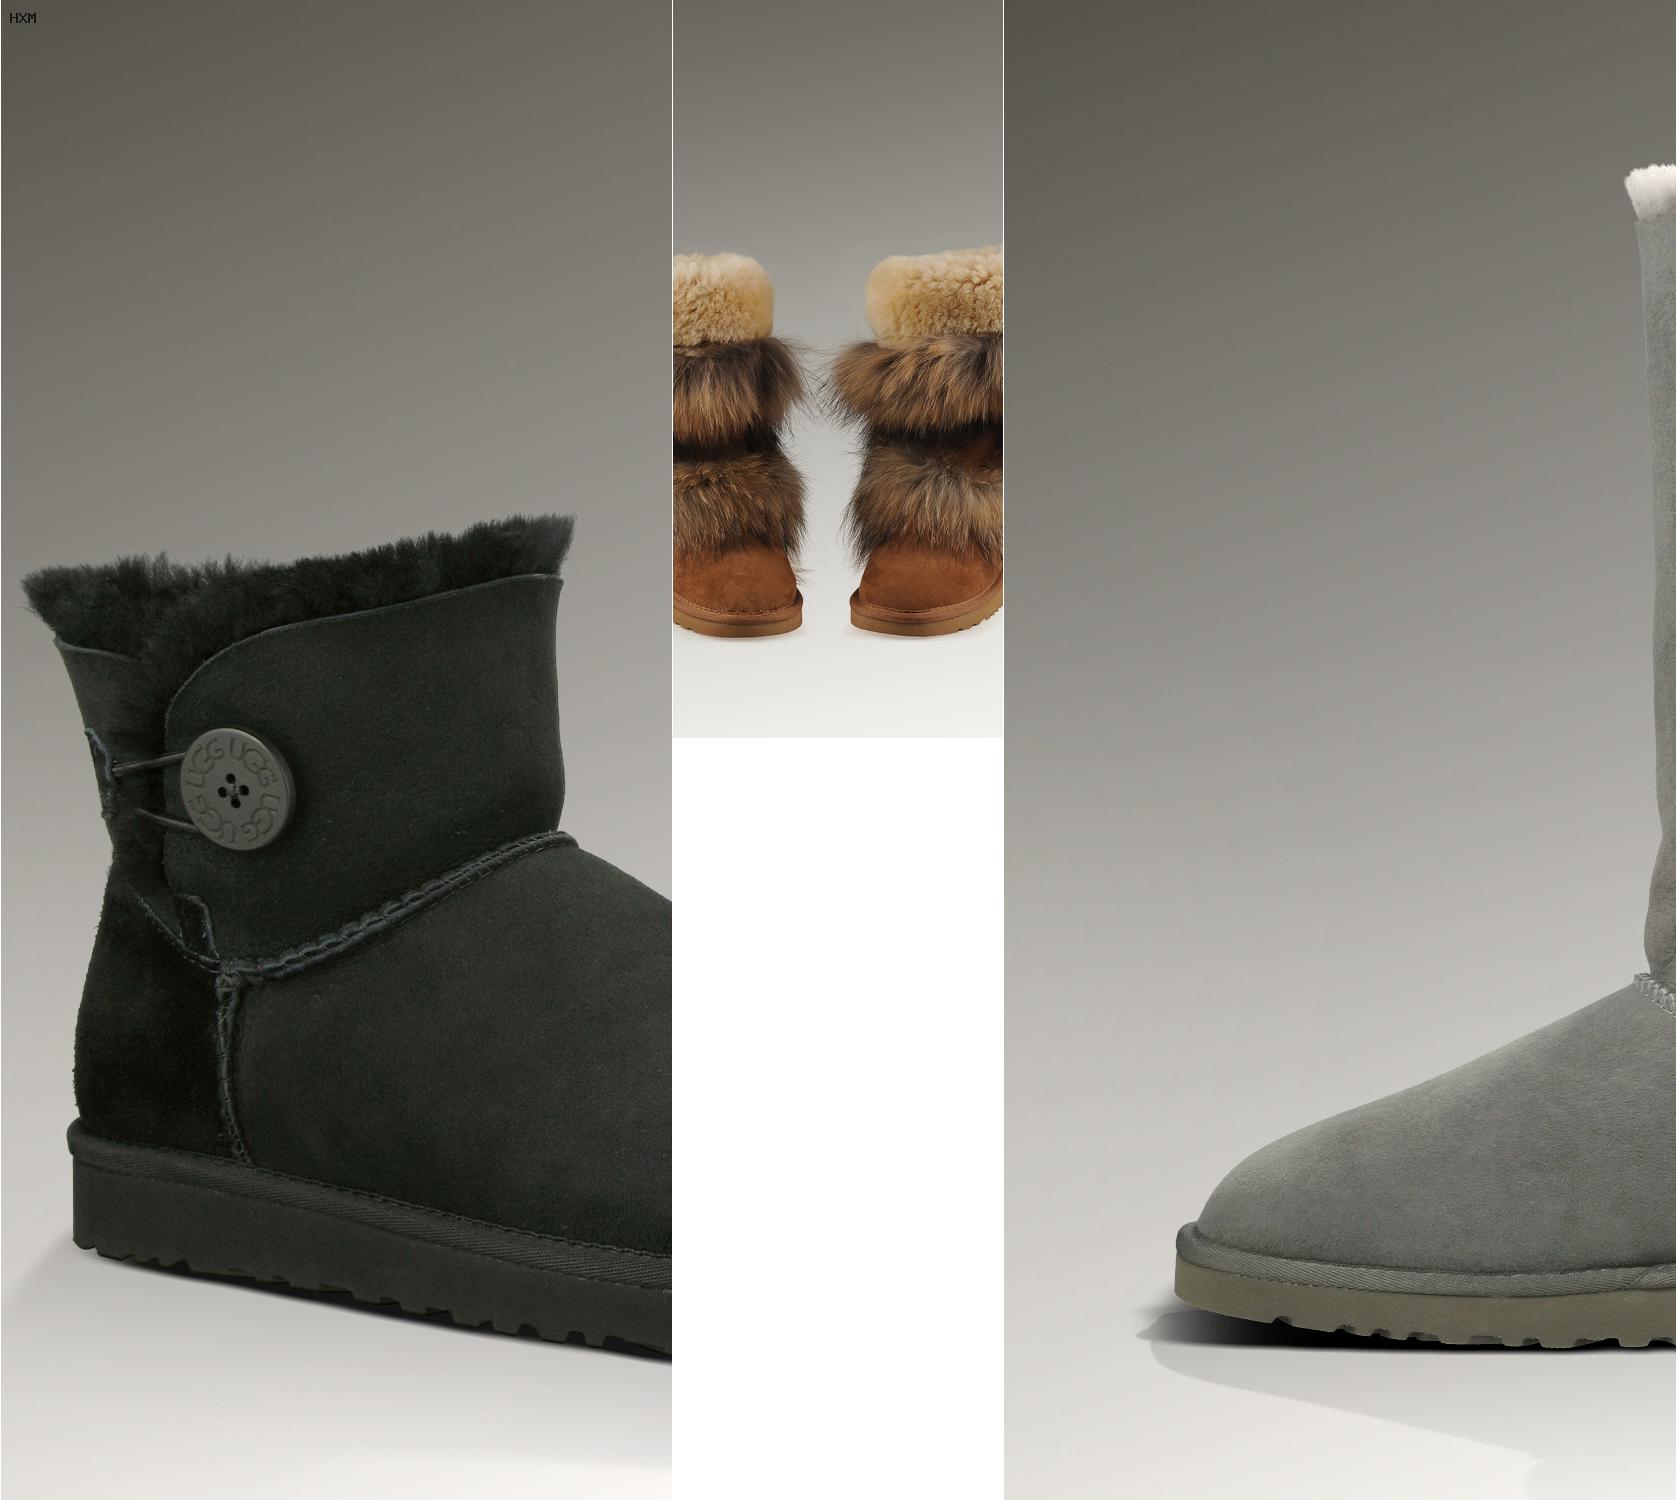 Amazon Jungle acceptable To contribute günstige ugg boots